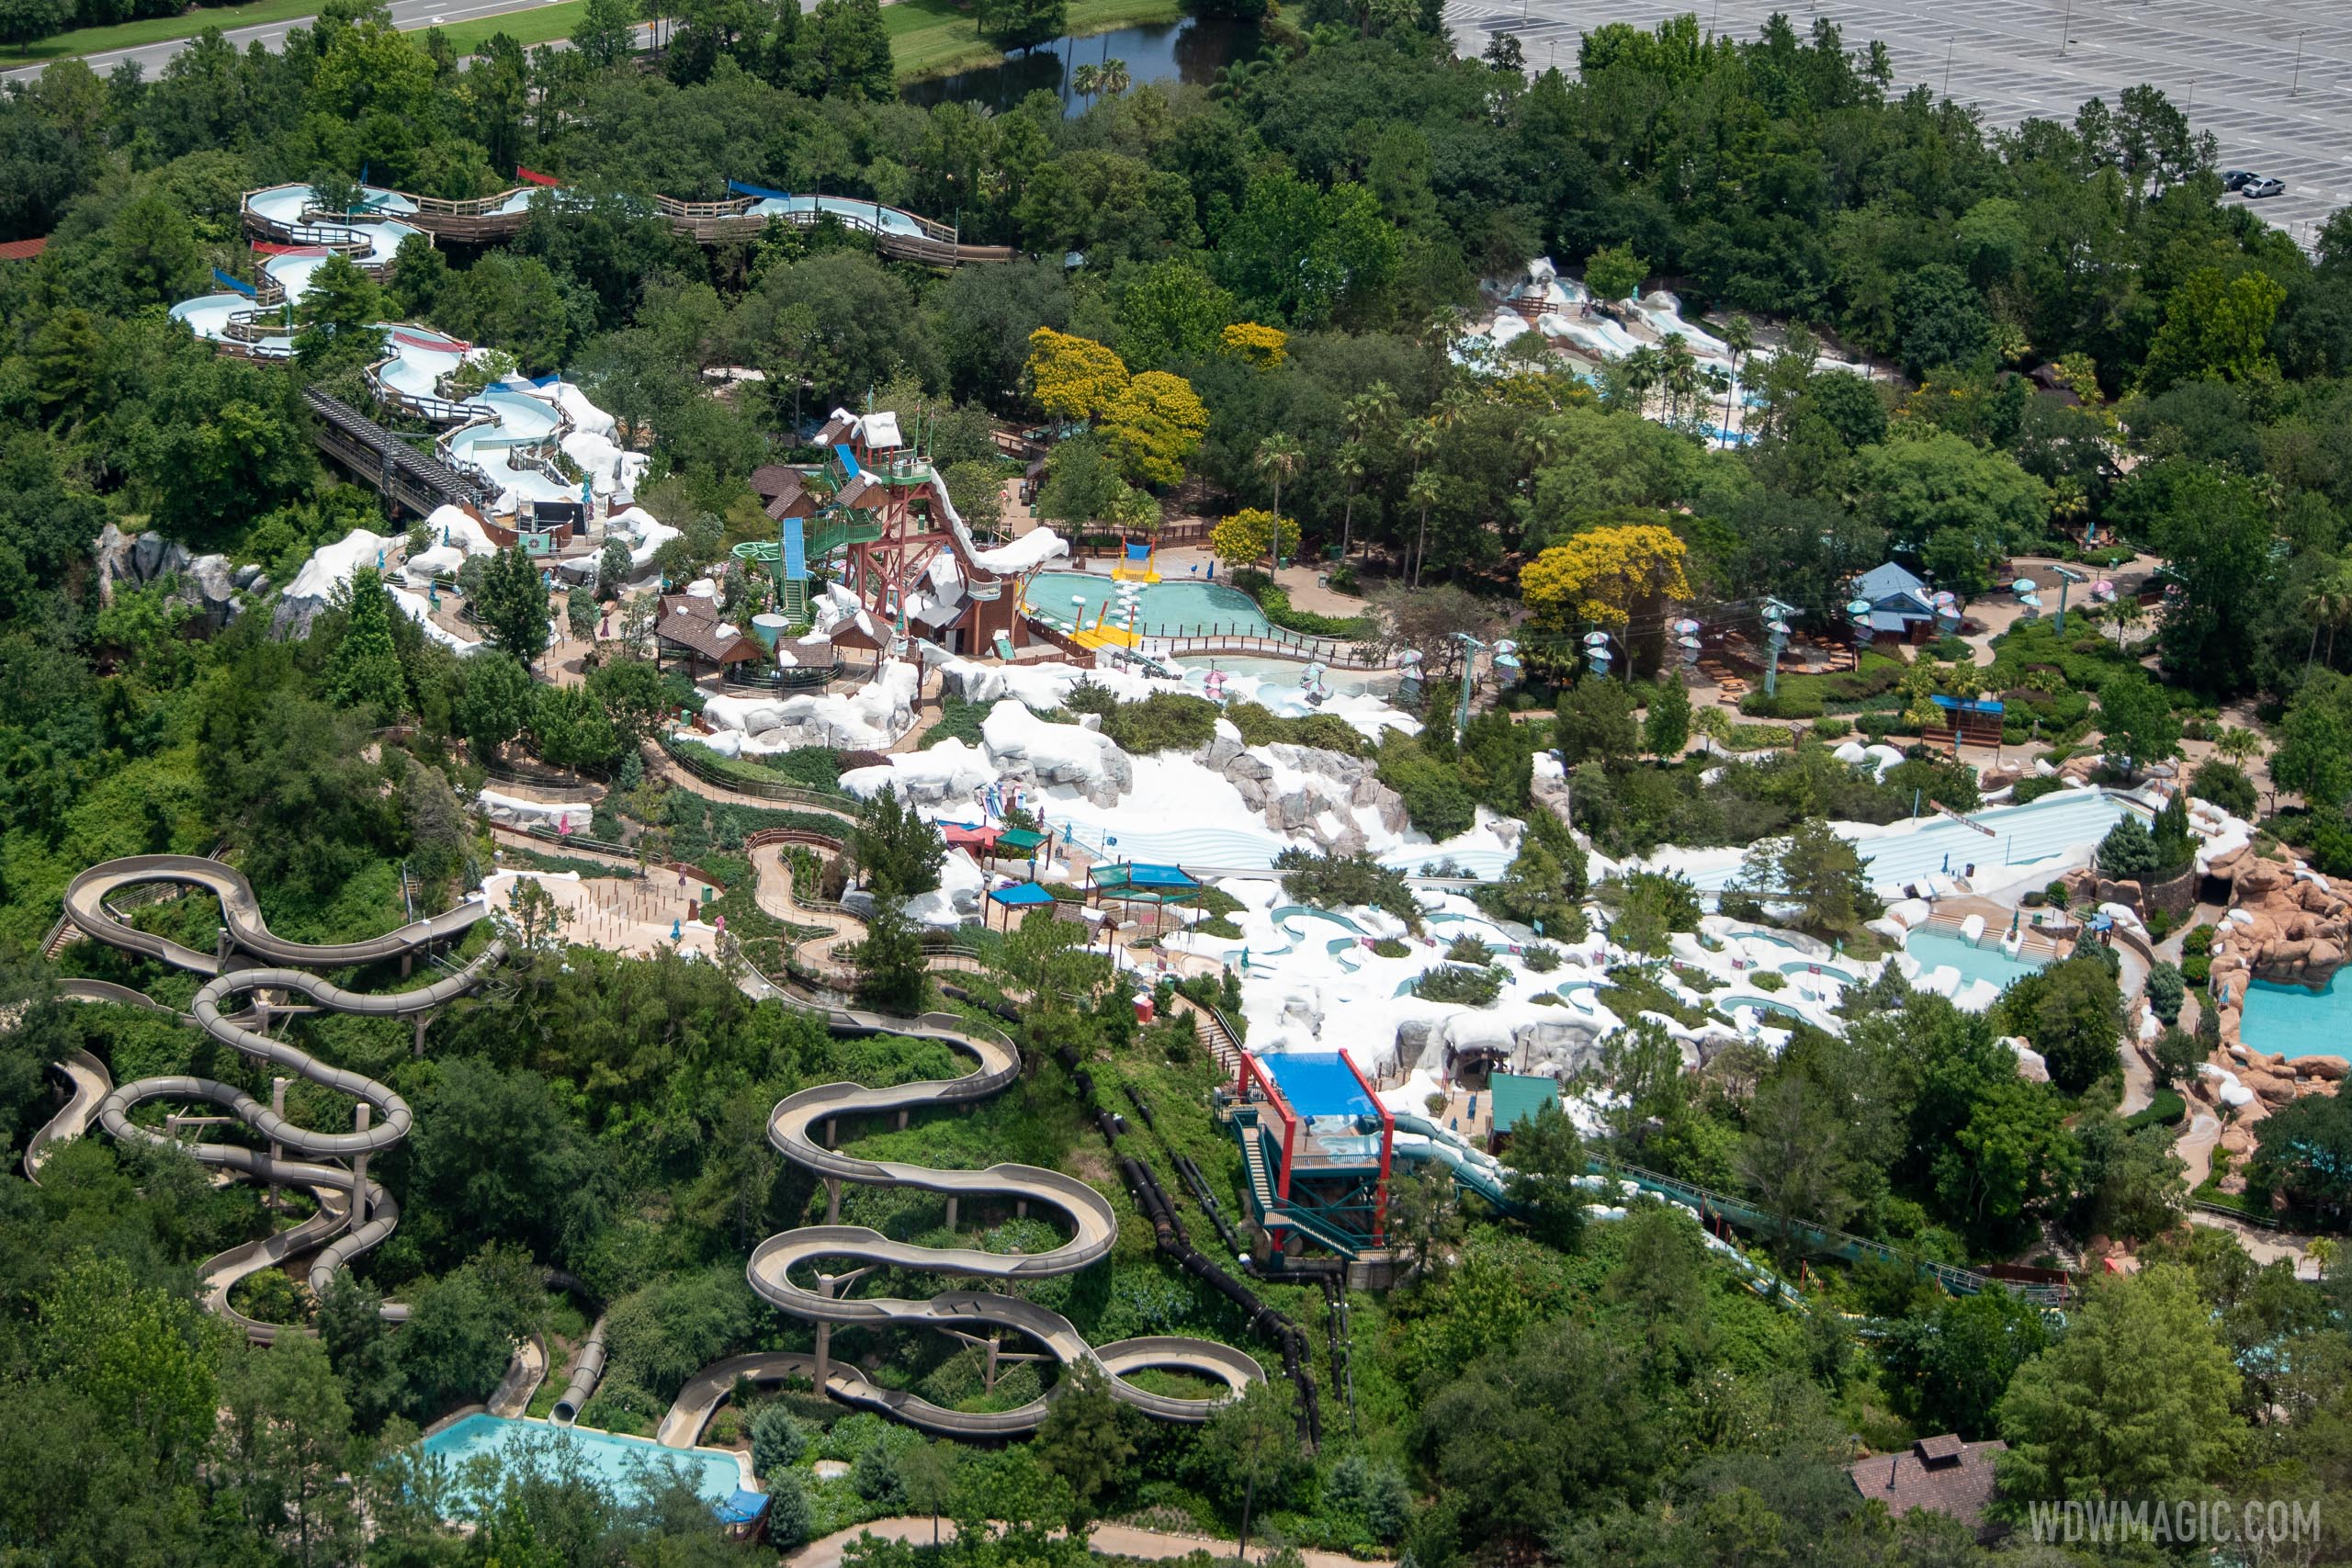 Blizzard Beach will be the first Disney water park to reopen in March